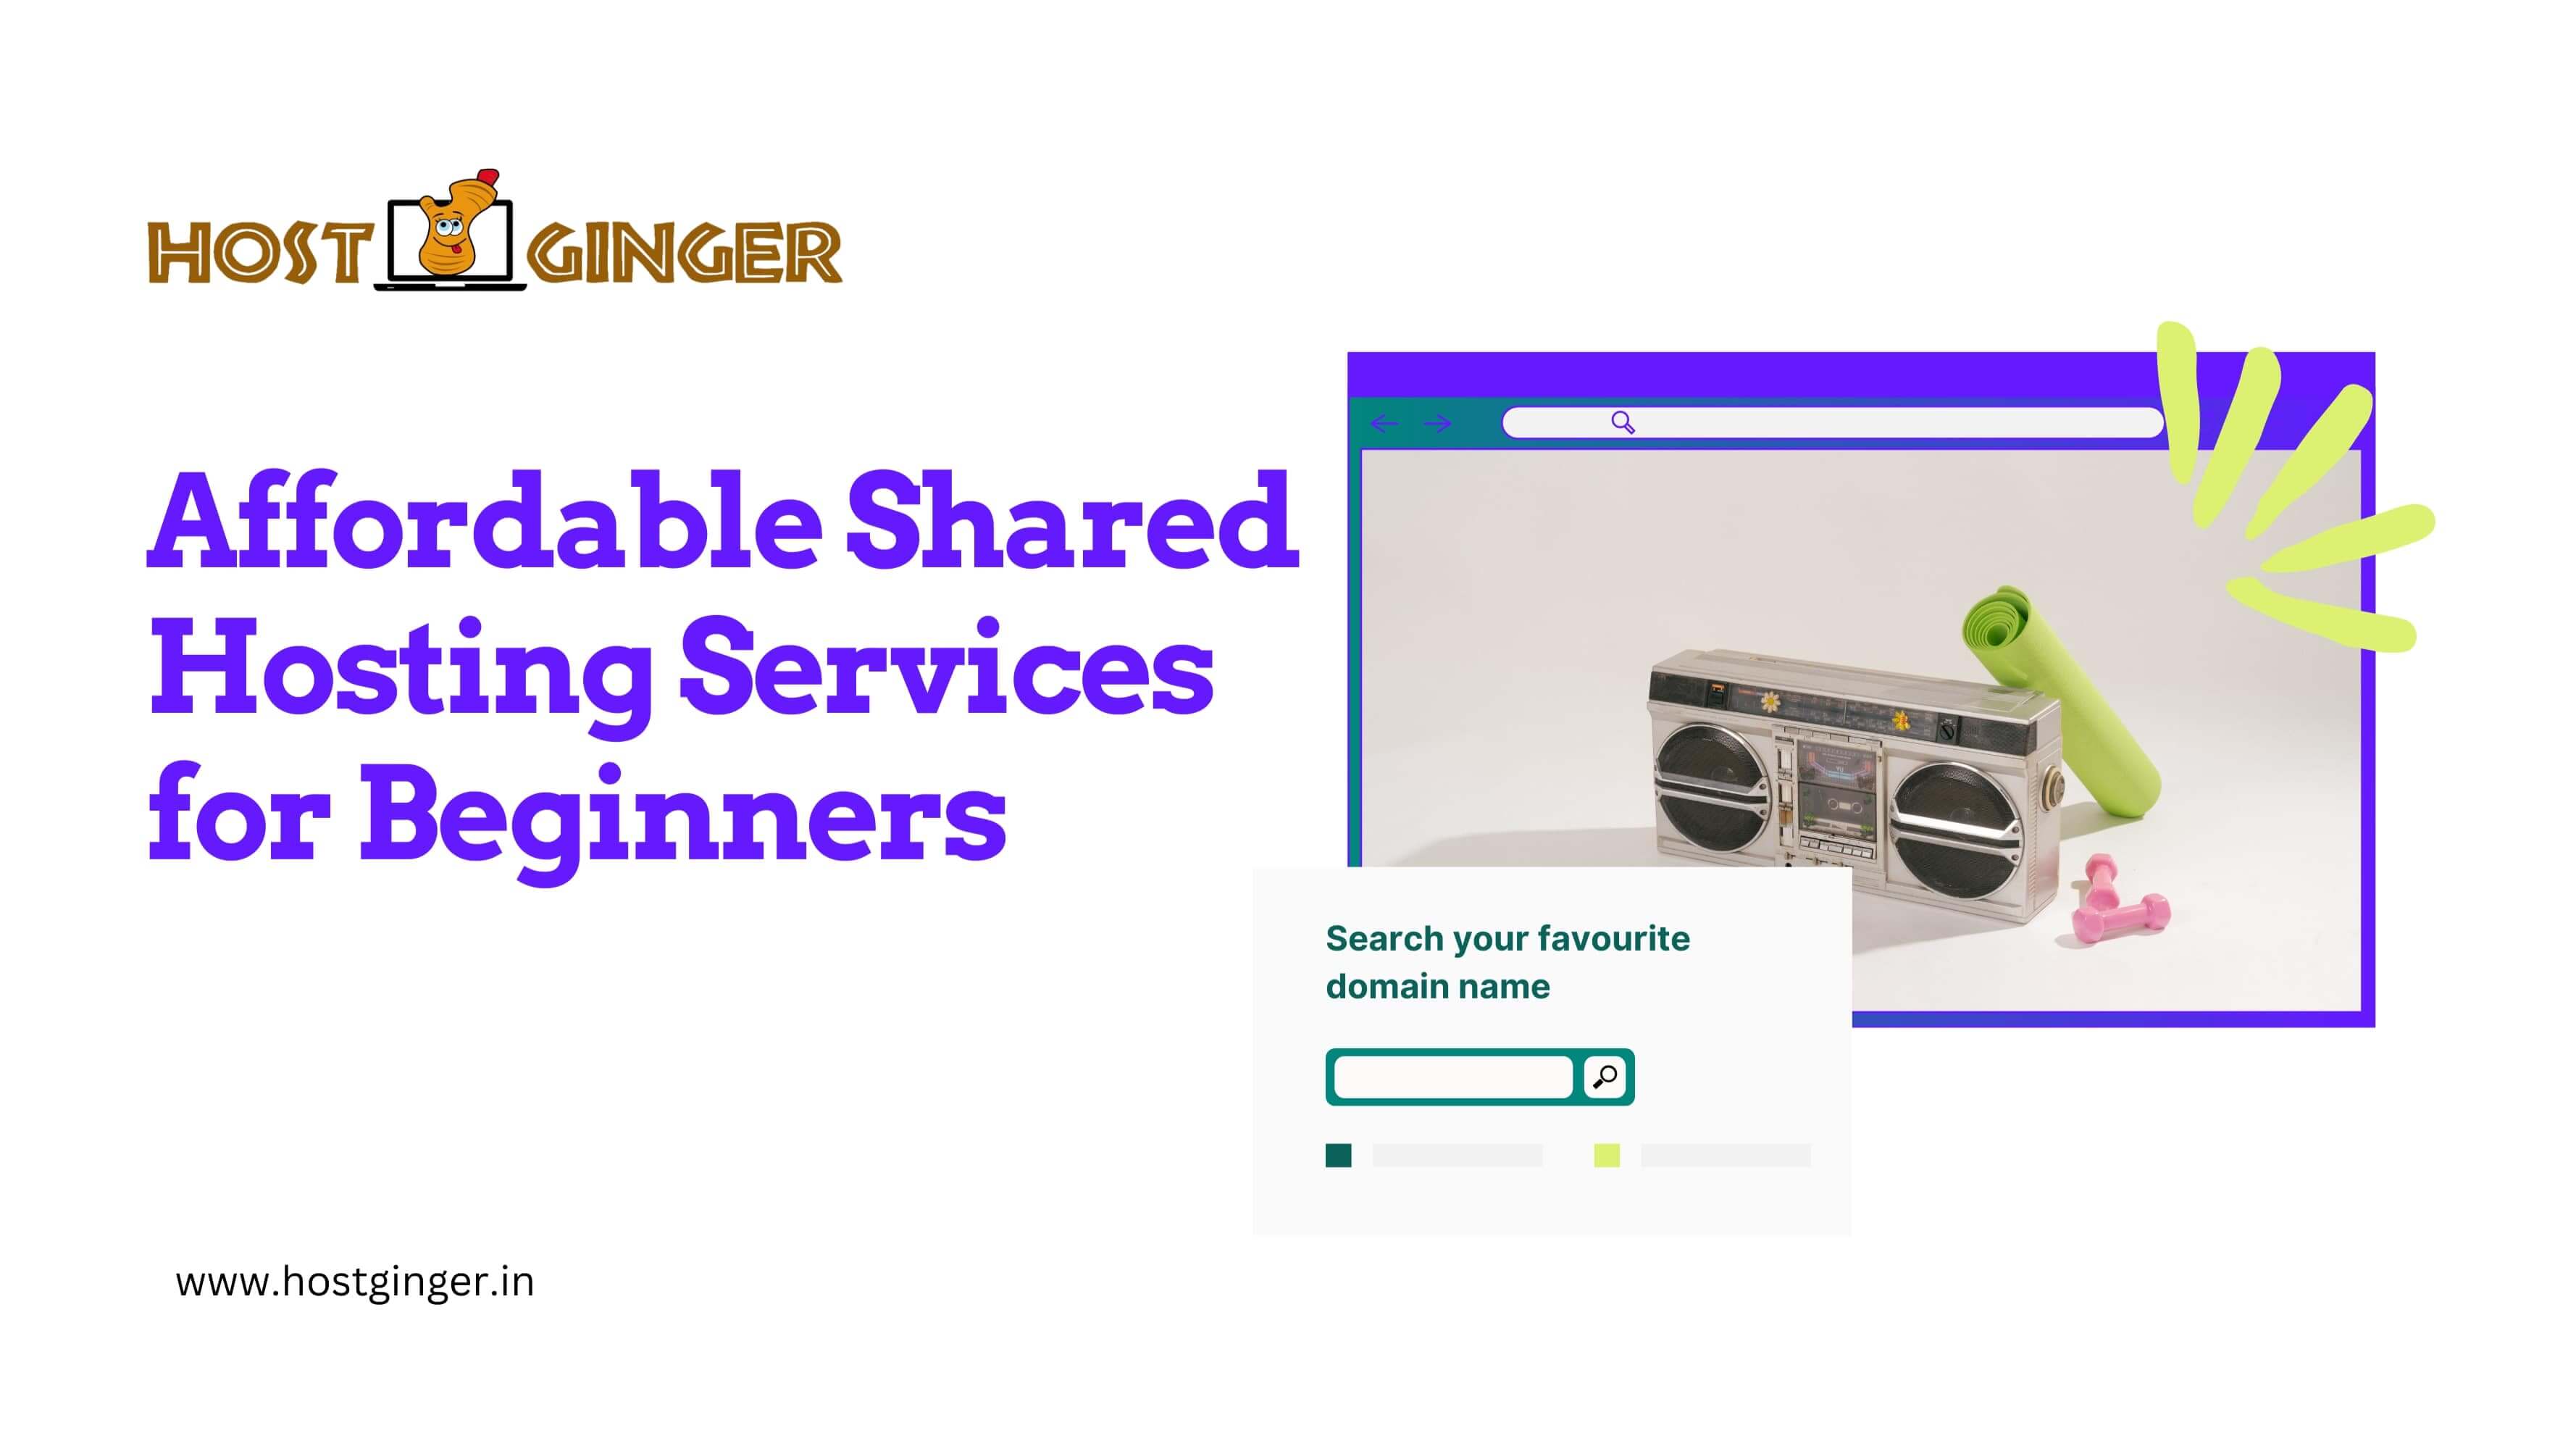 Affordable Shared Hosting Services for Beginners